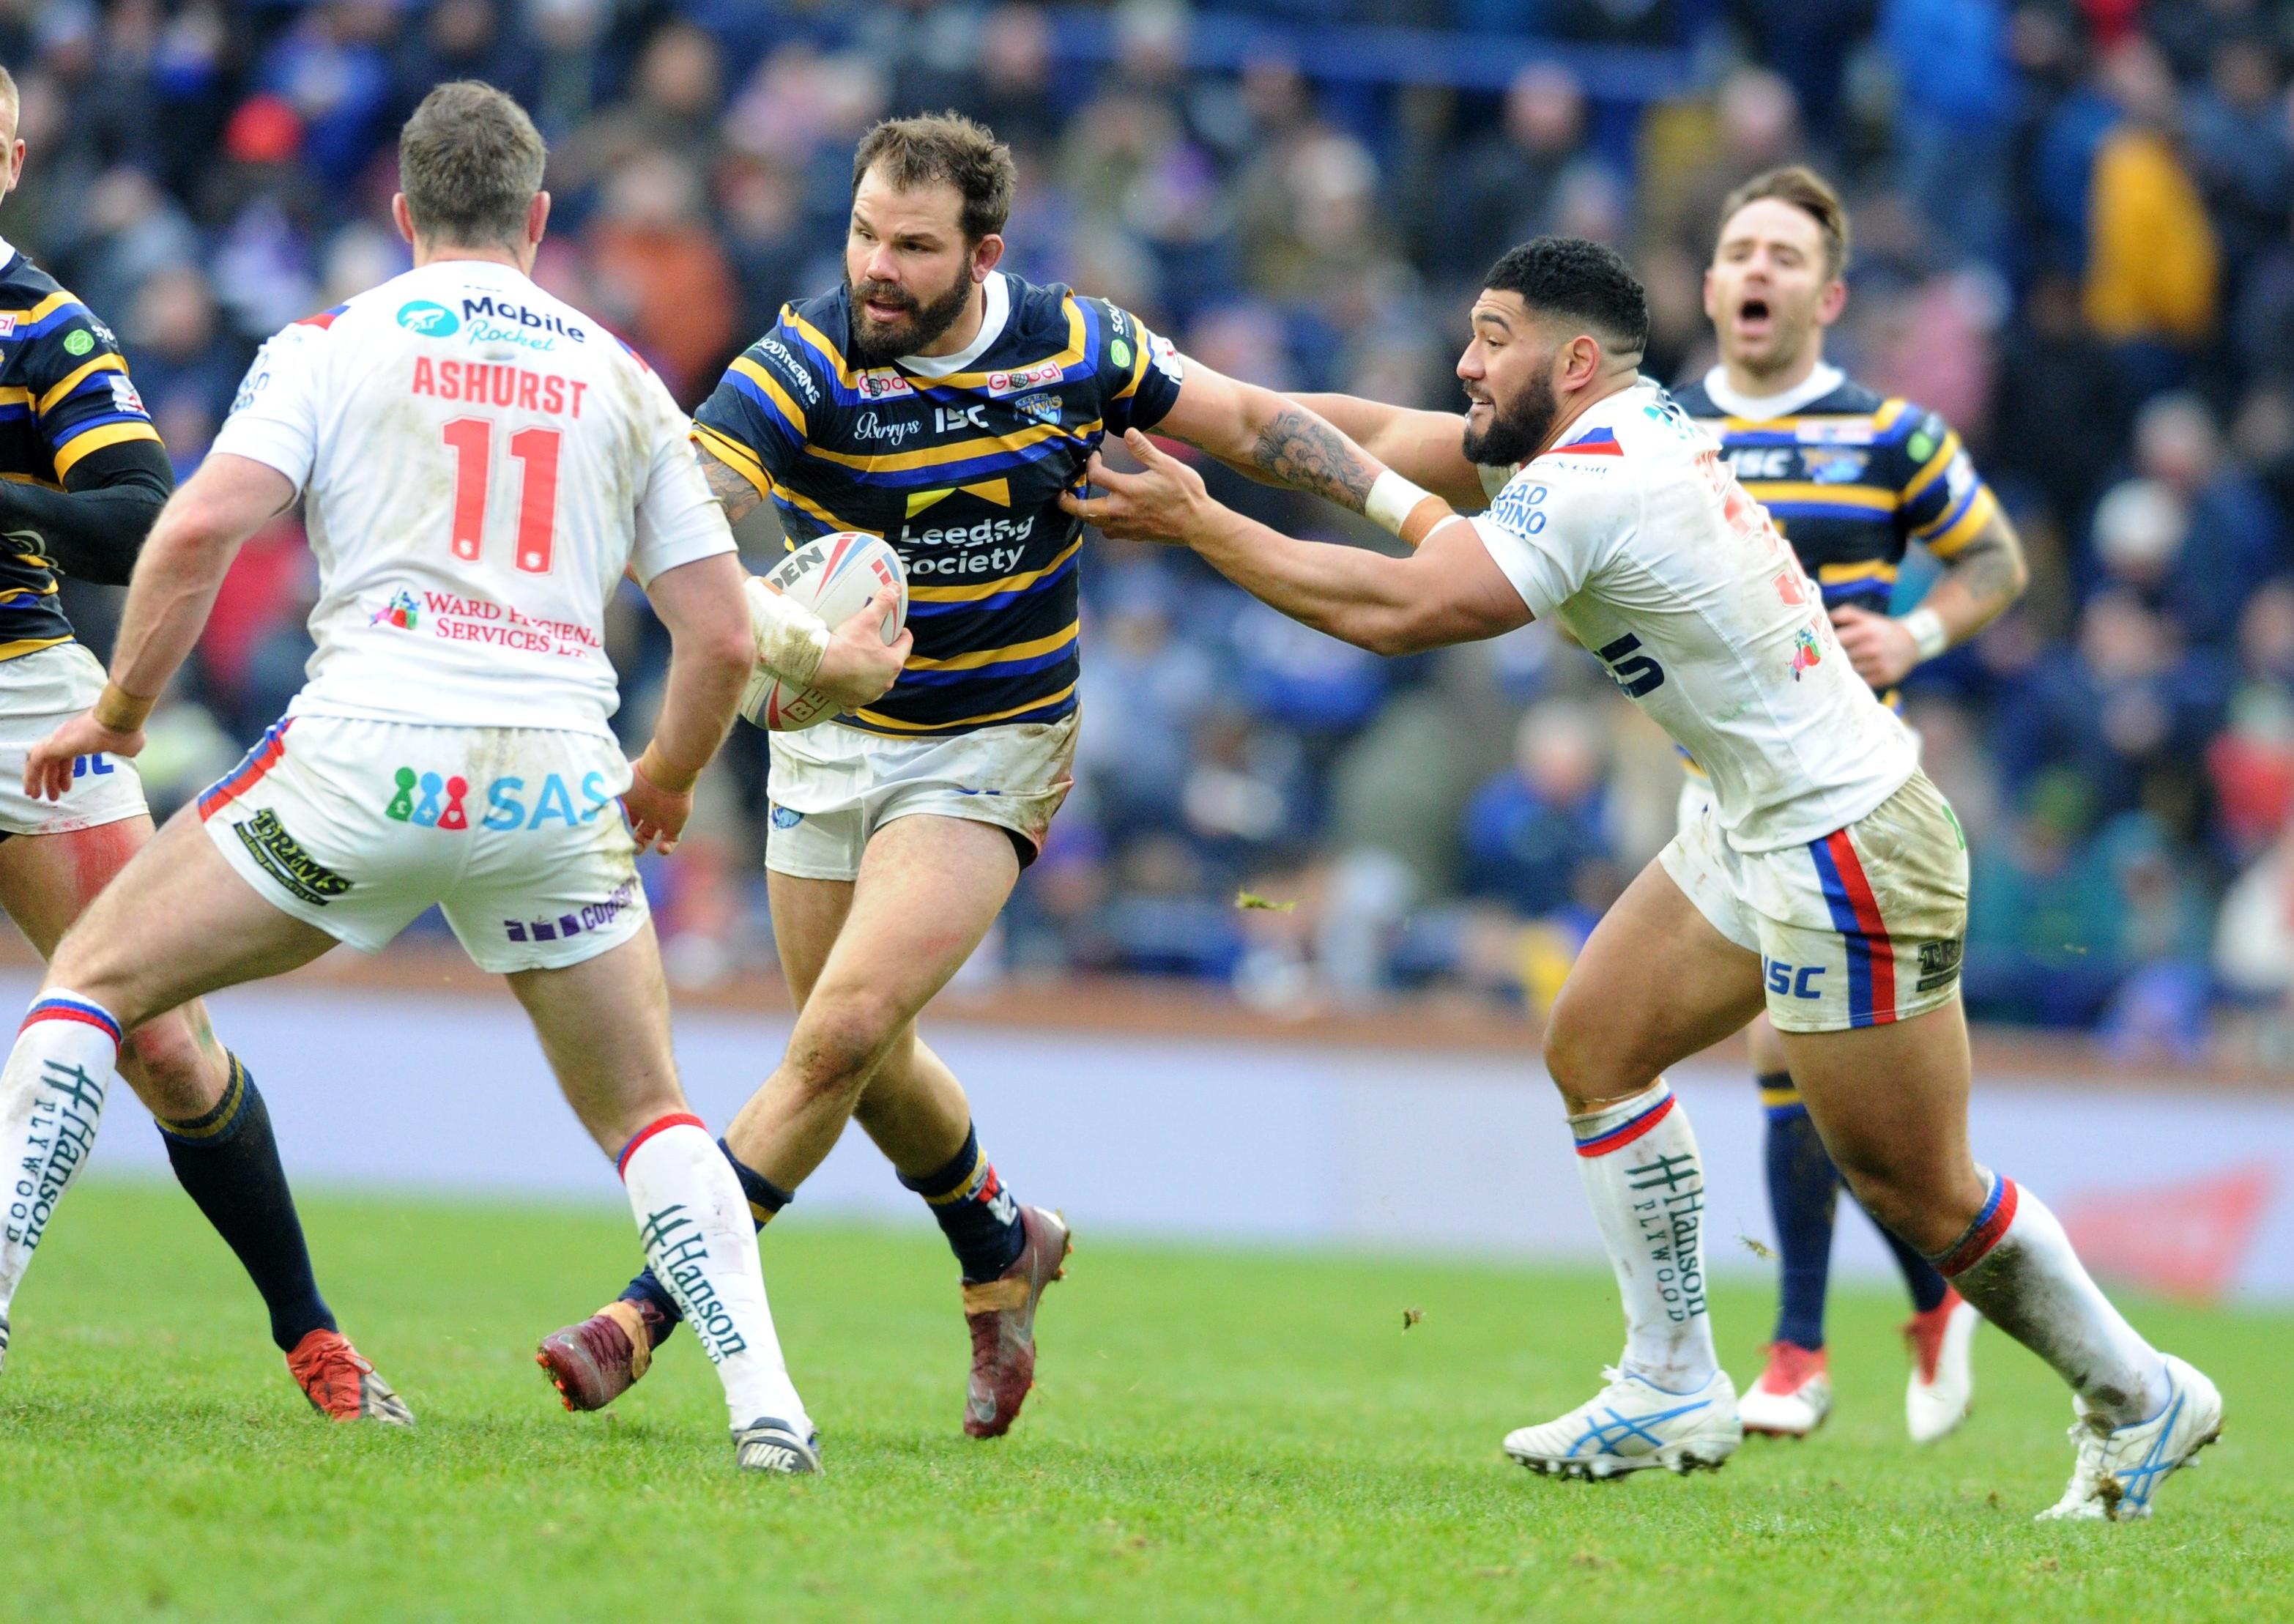 Adam Cuthbertson takes on the Wakefield Trinity defence during today's Wetherby Whaler Festive Challenge.